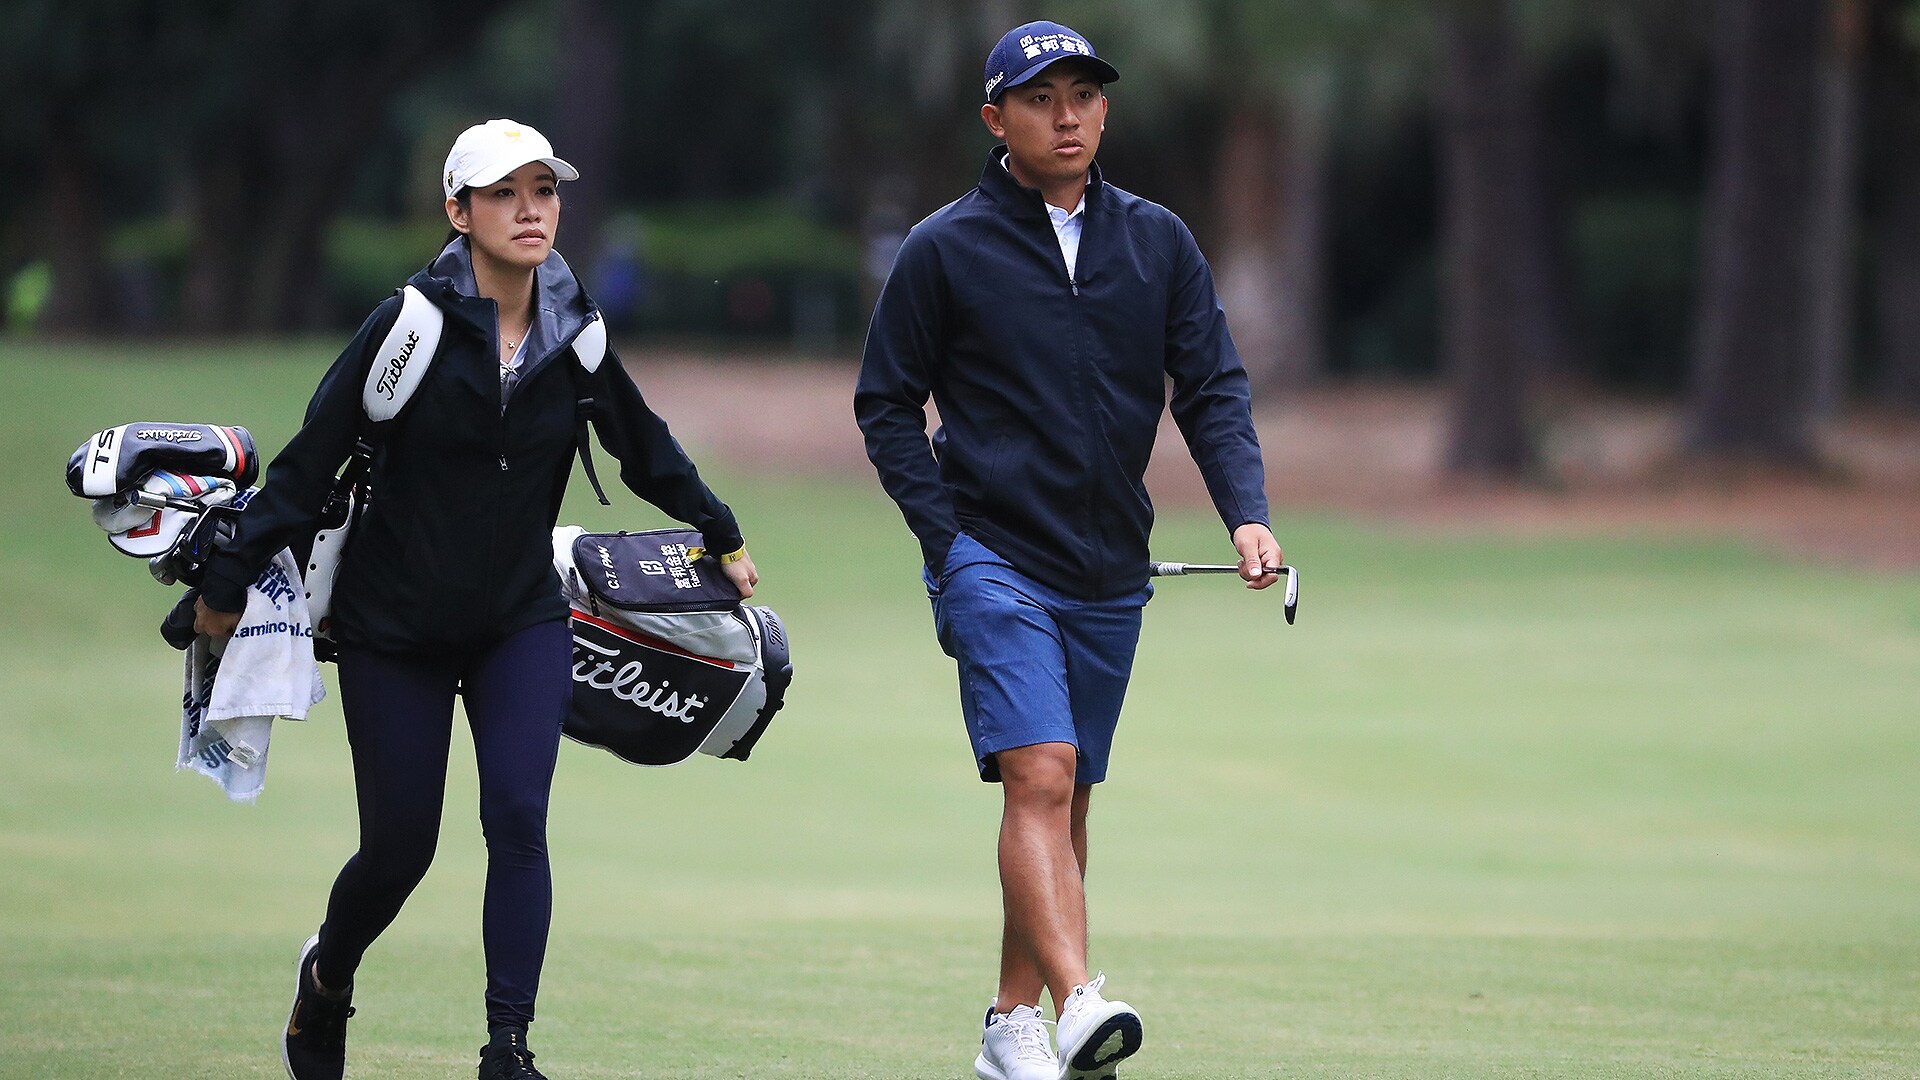 C.T. Pan back to defend at RBC Heritage and traveling with family in an RV